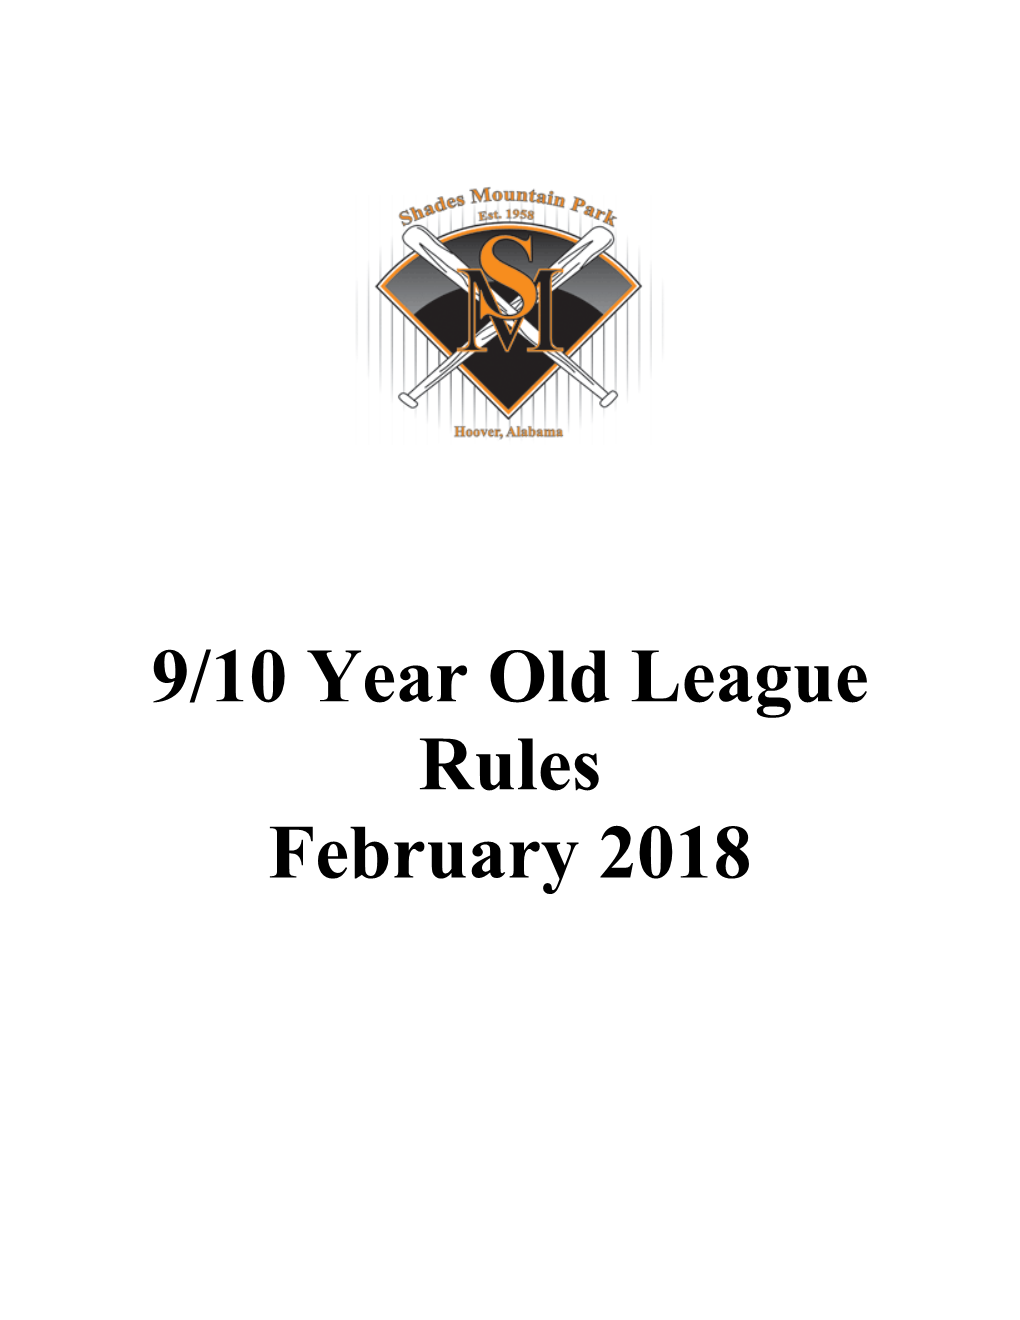 9/10 Year Old League Rules February 2018